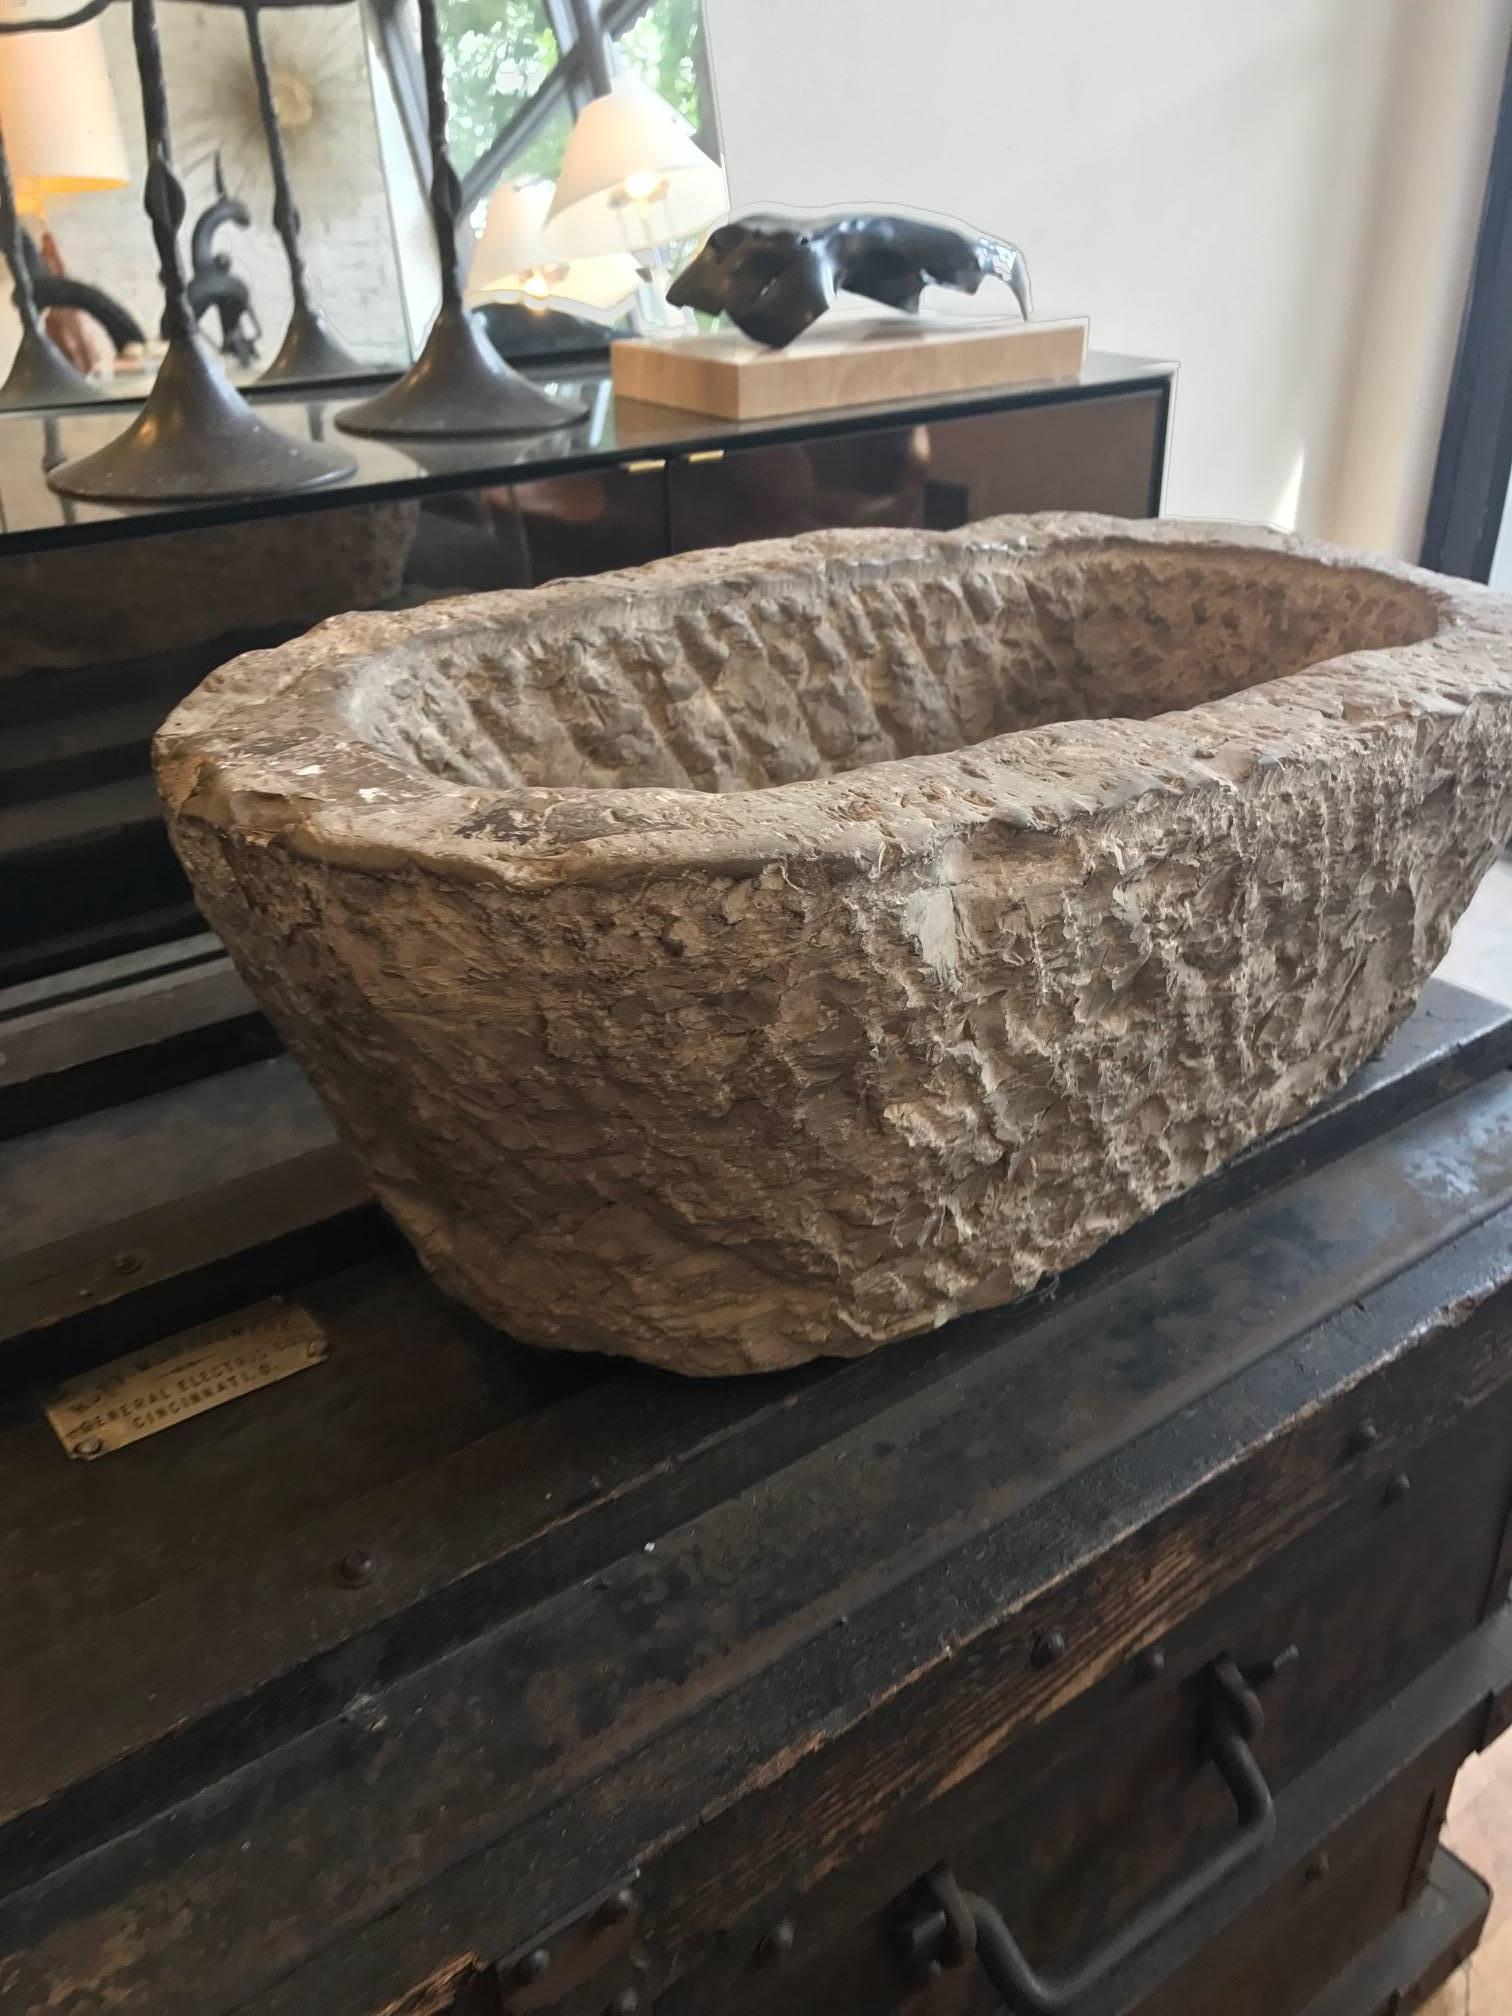 Chinese Oval Stone Mortar Trough 2